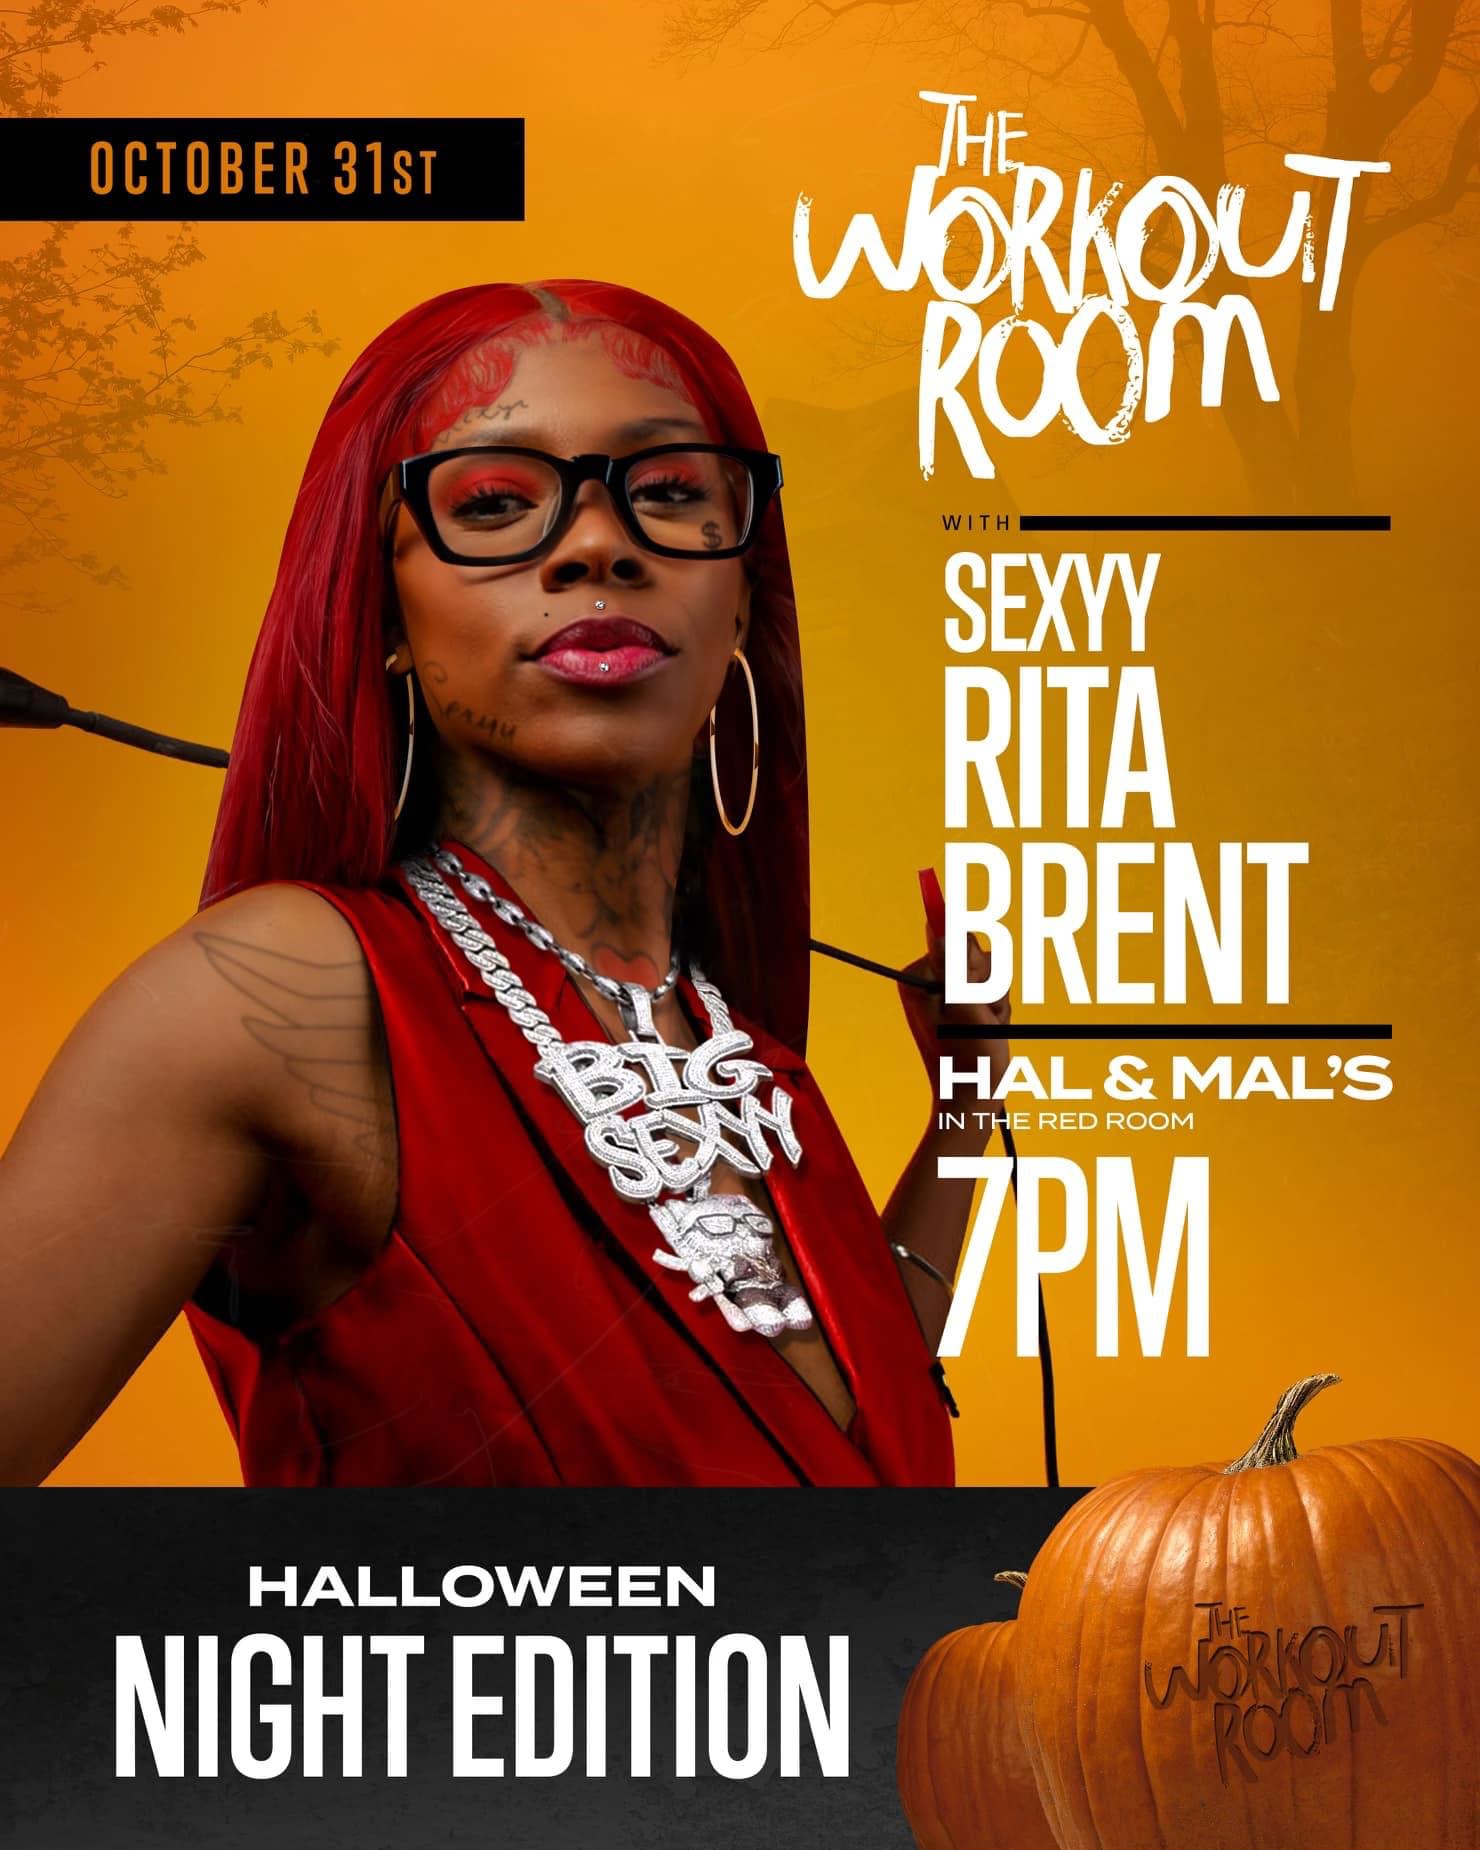 The Workout Room with Rita Brent HALLOWEEN Edition